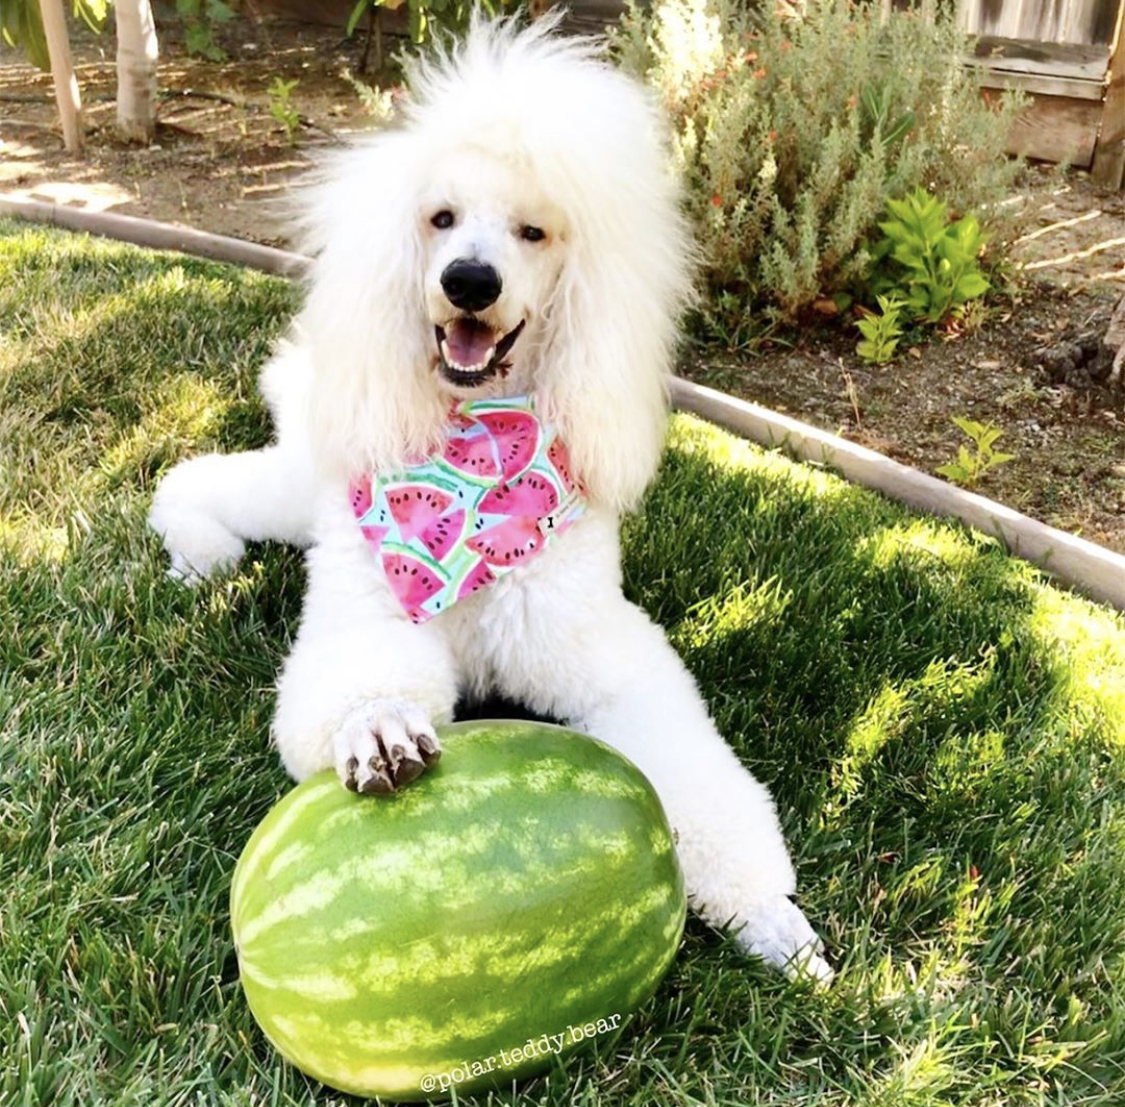 A Poodle lying in the garden behind the large harvested watermelon